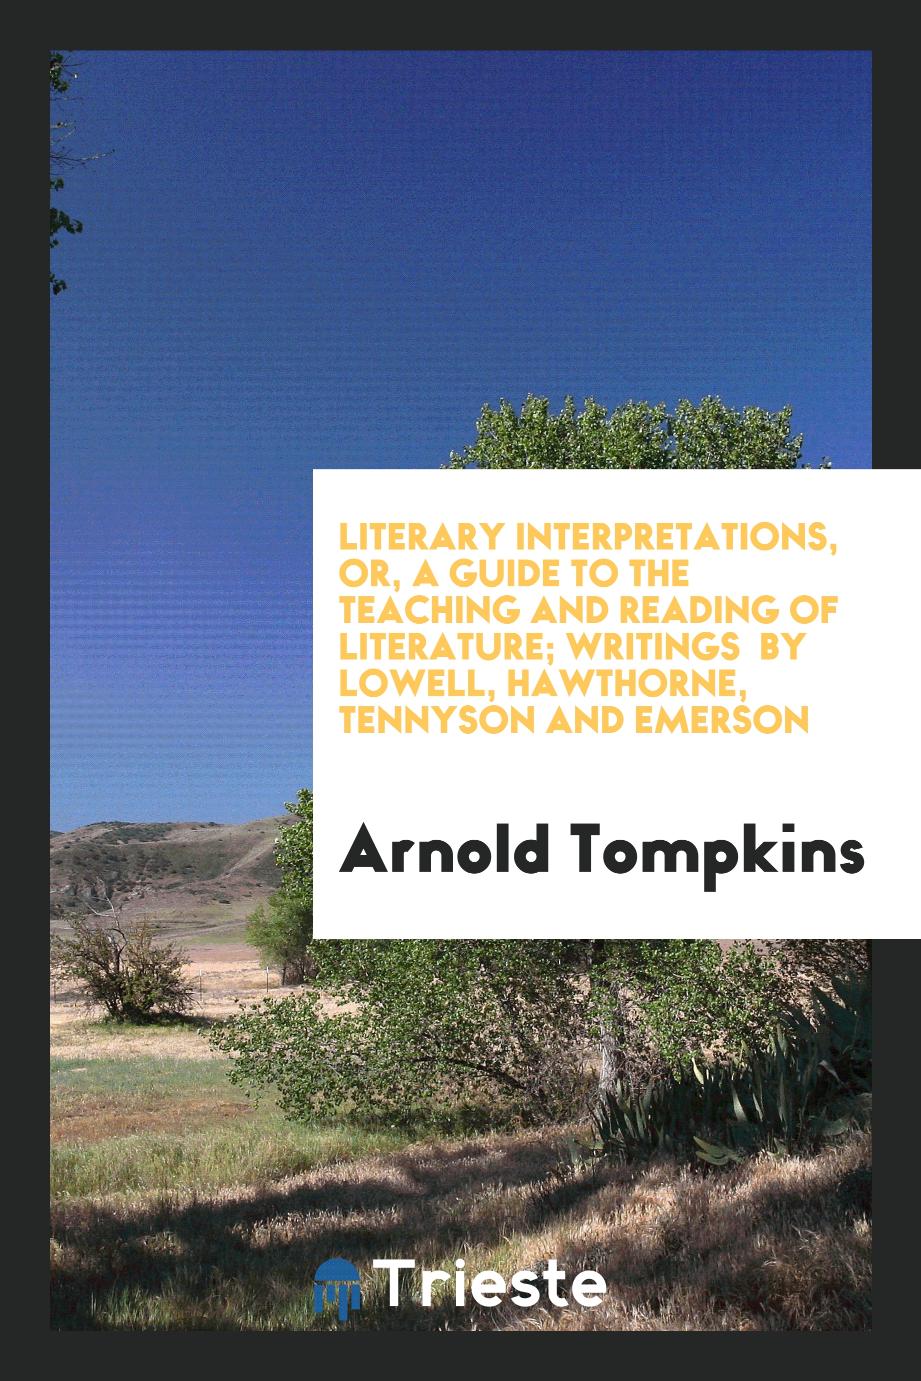 Literary Interpretations, or, a Guide to the Teaching and Reading of Literature; Writings by Lowell, Hawthorne, Tennyson and Emerson